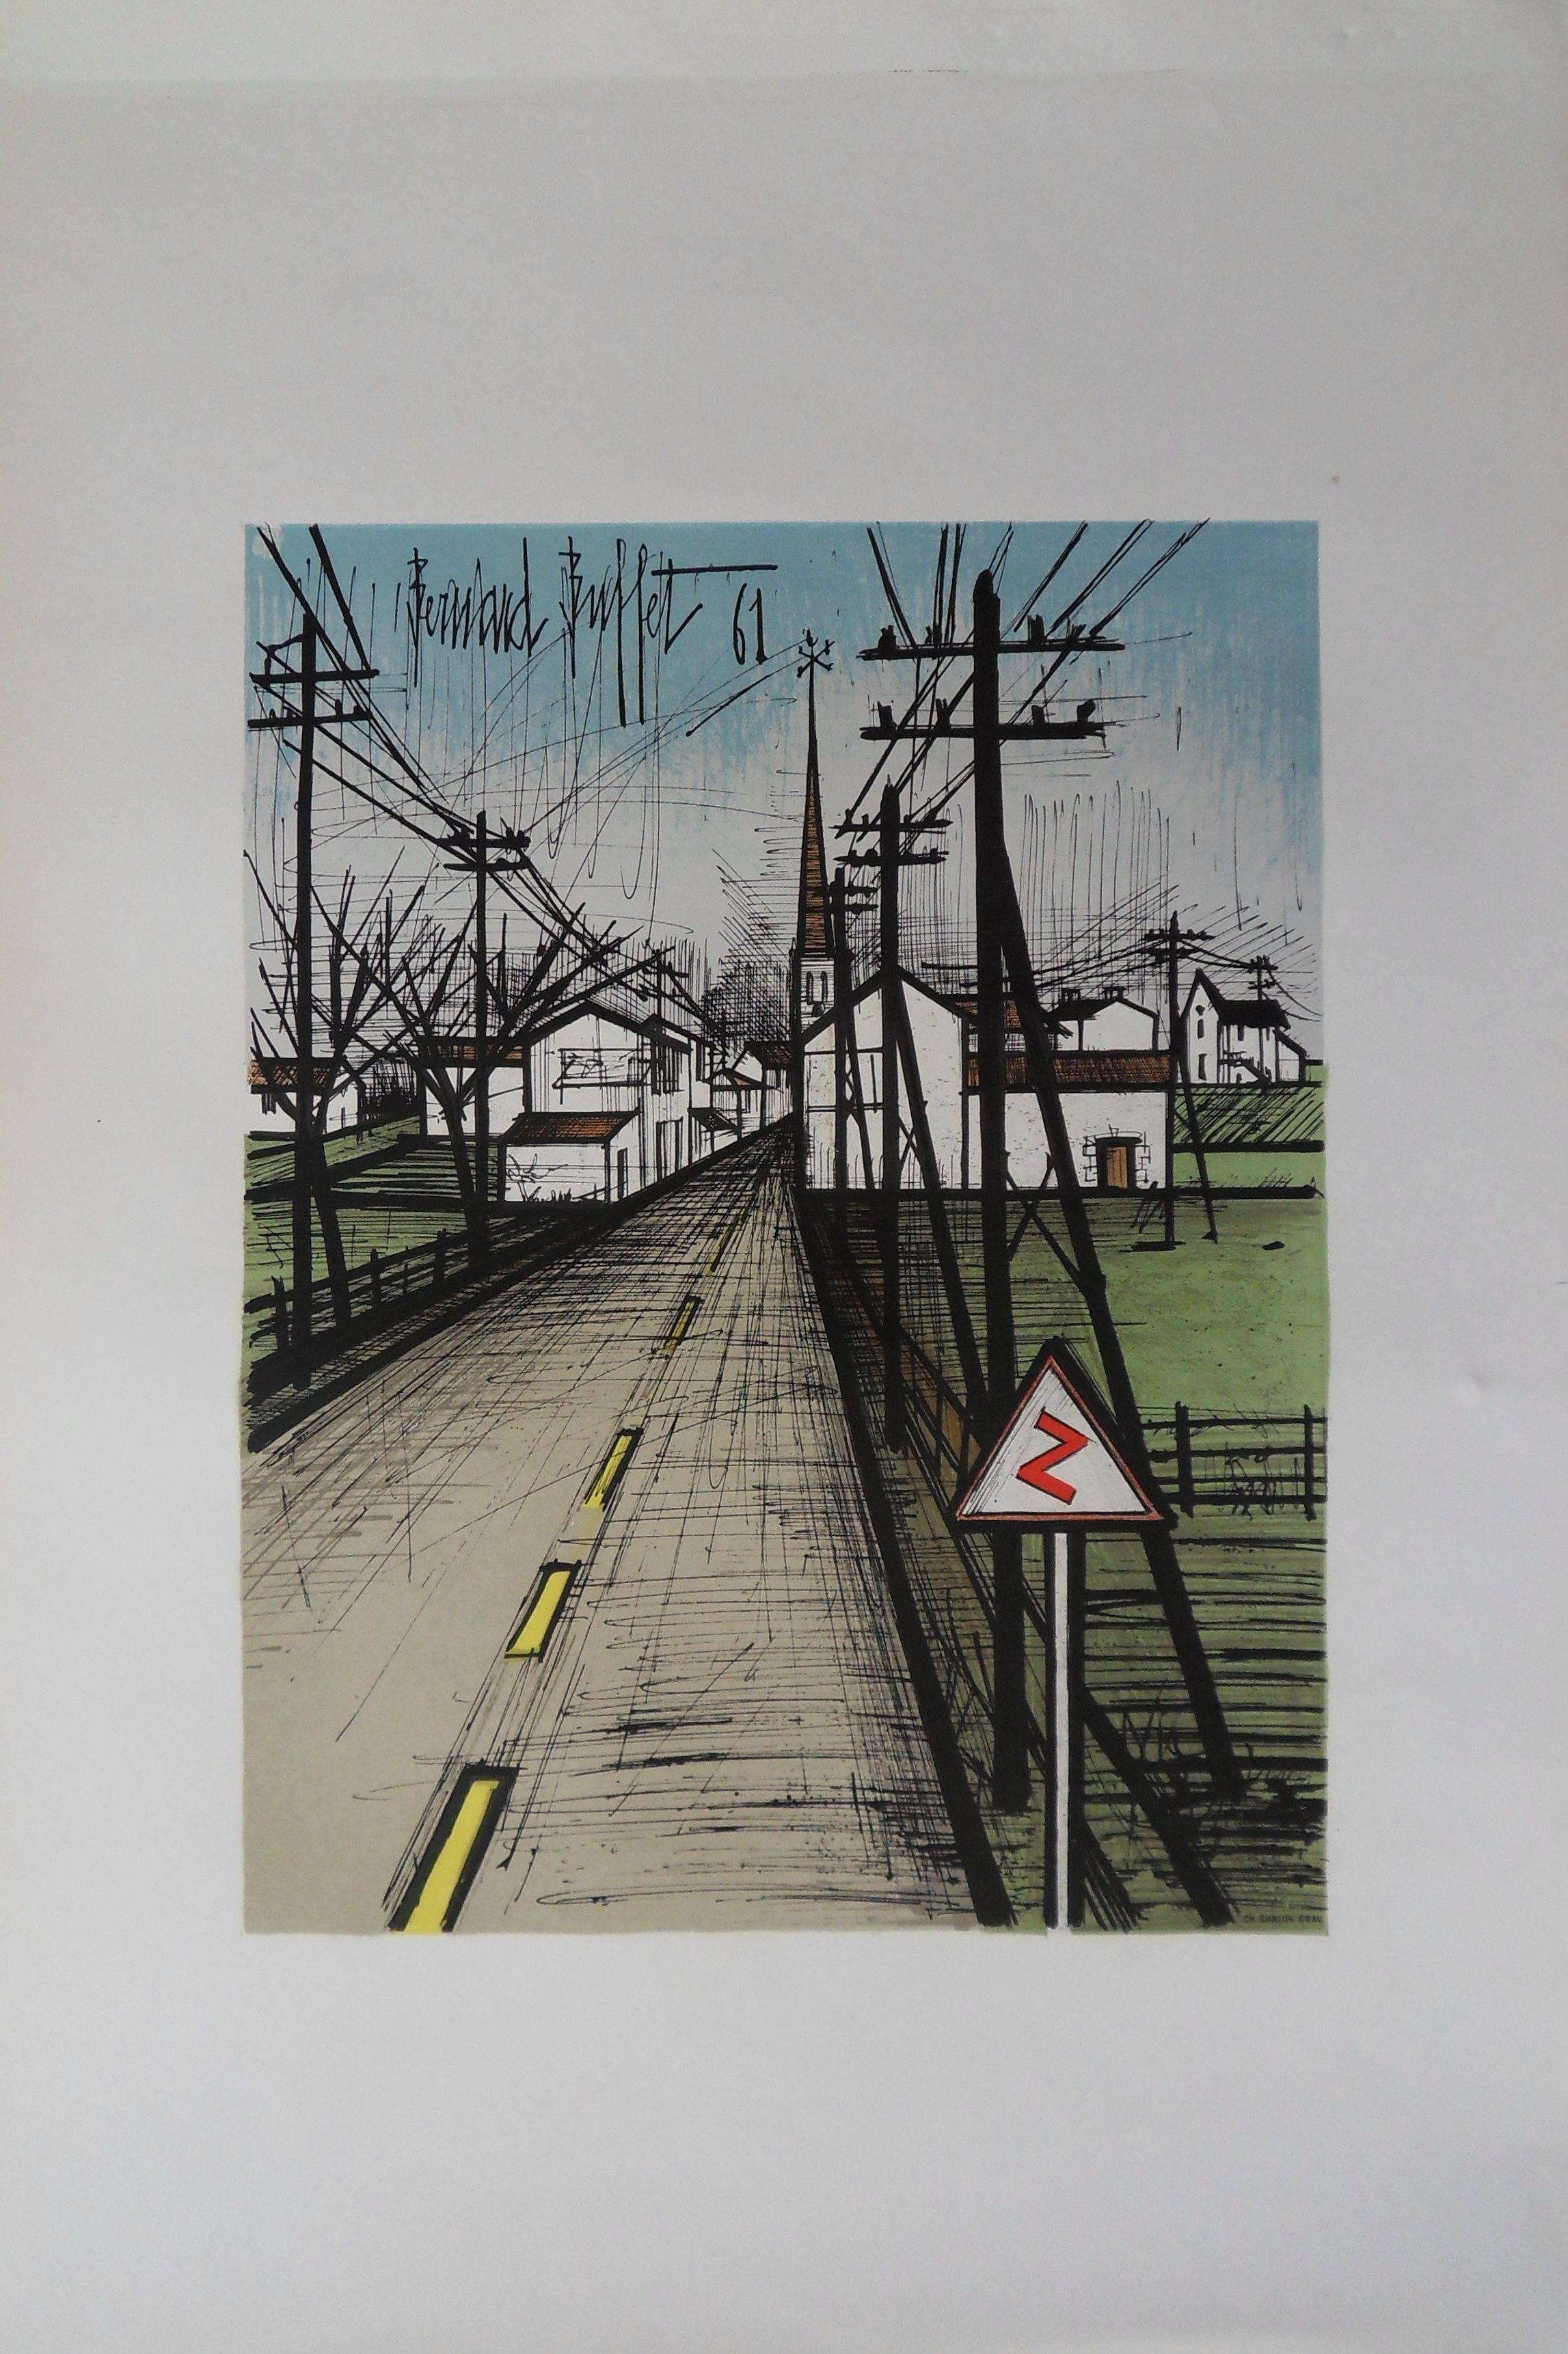 Bernard BUFFET
The road, 1962

Original lithograph in colors
Printed signature in the plate
Atelier Mourlot
SIZE : 23 x 16 inch
REFRENCES : Catalogue raisonne Bernard Buffet Lithographe vol 1, reference #305

Excellent condition